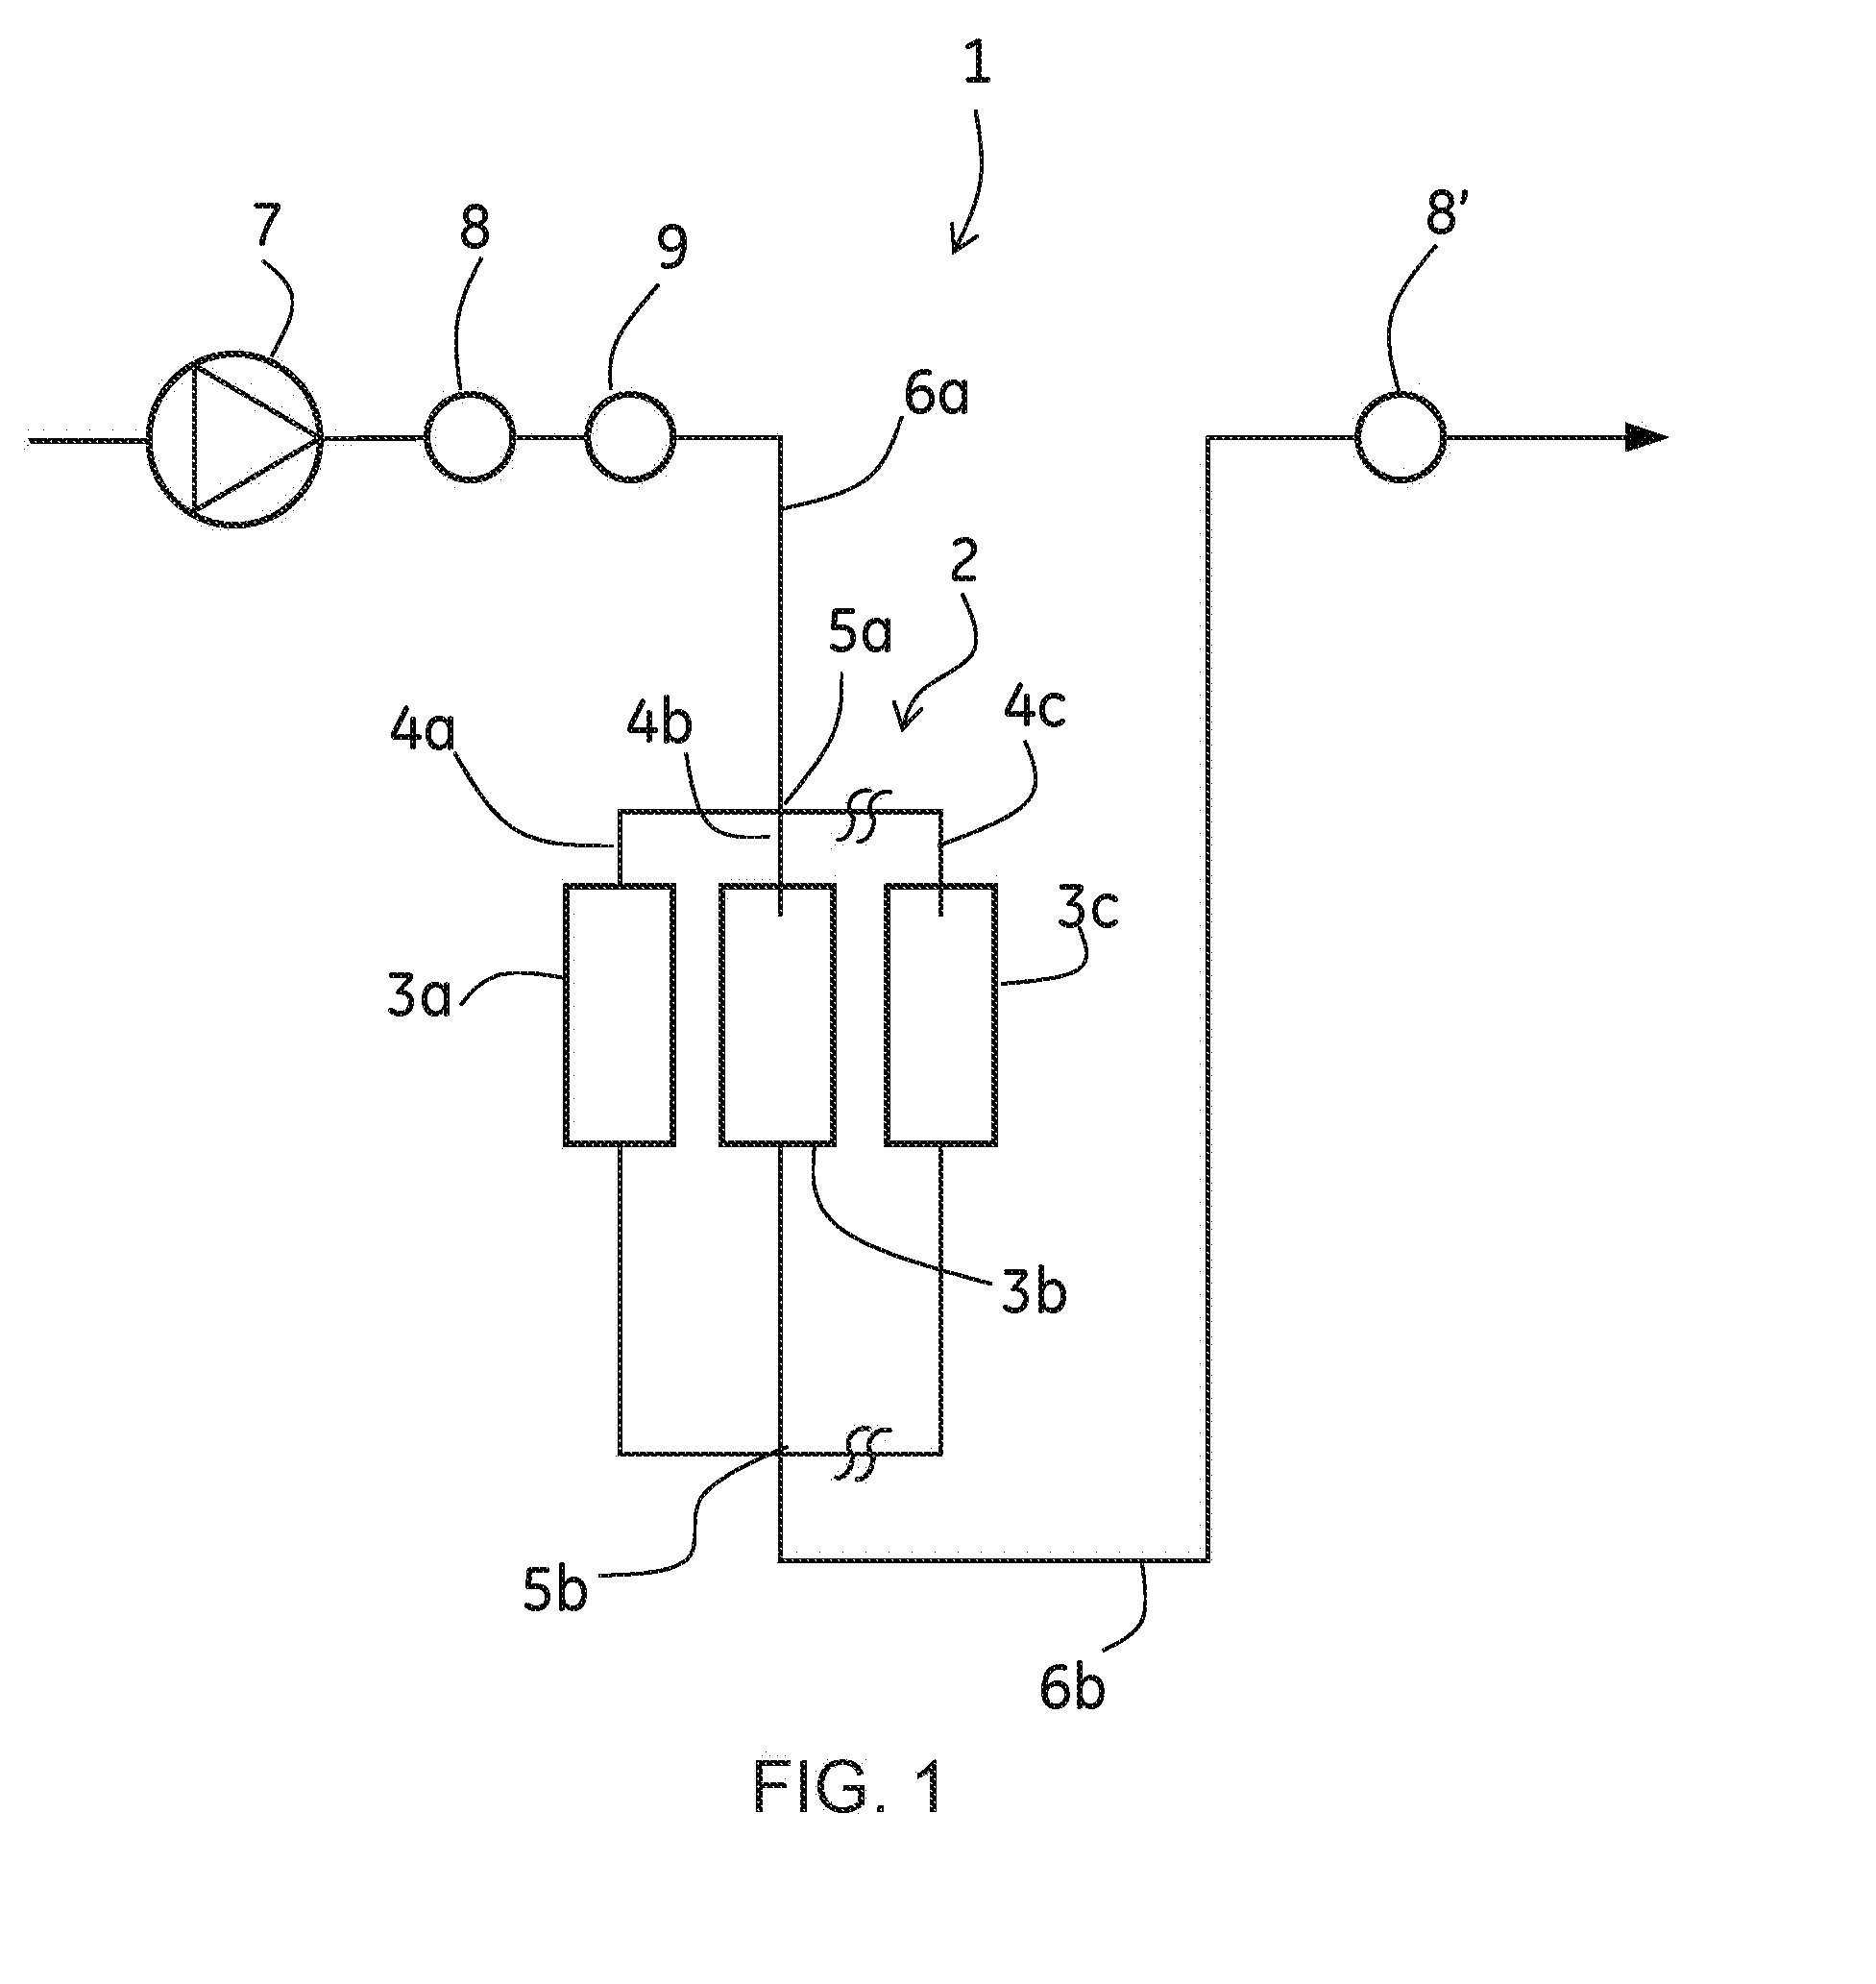 Parallel assembly of chromatograpy column modules